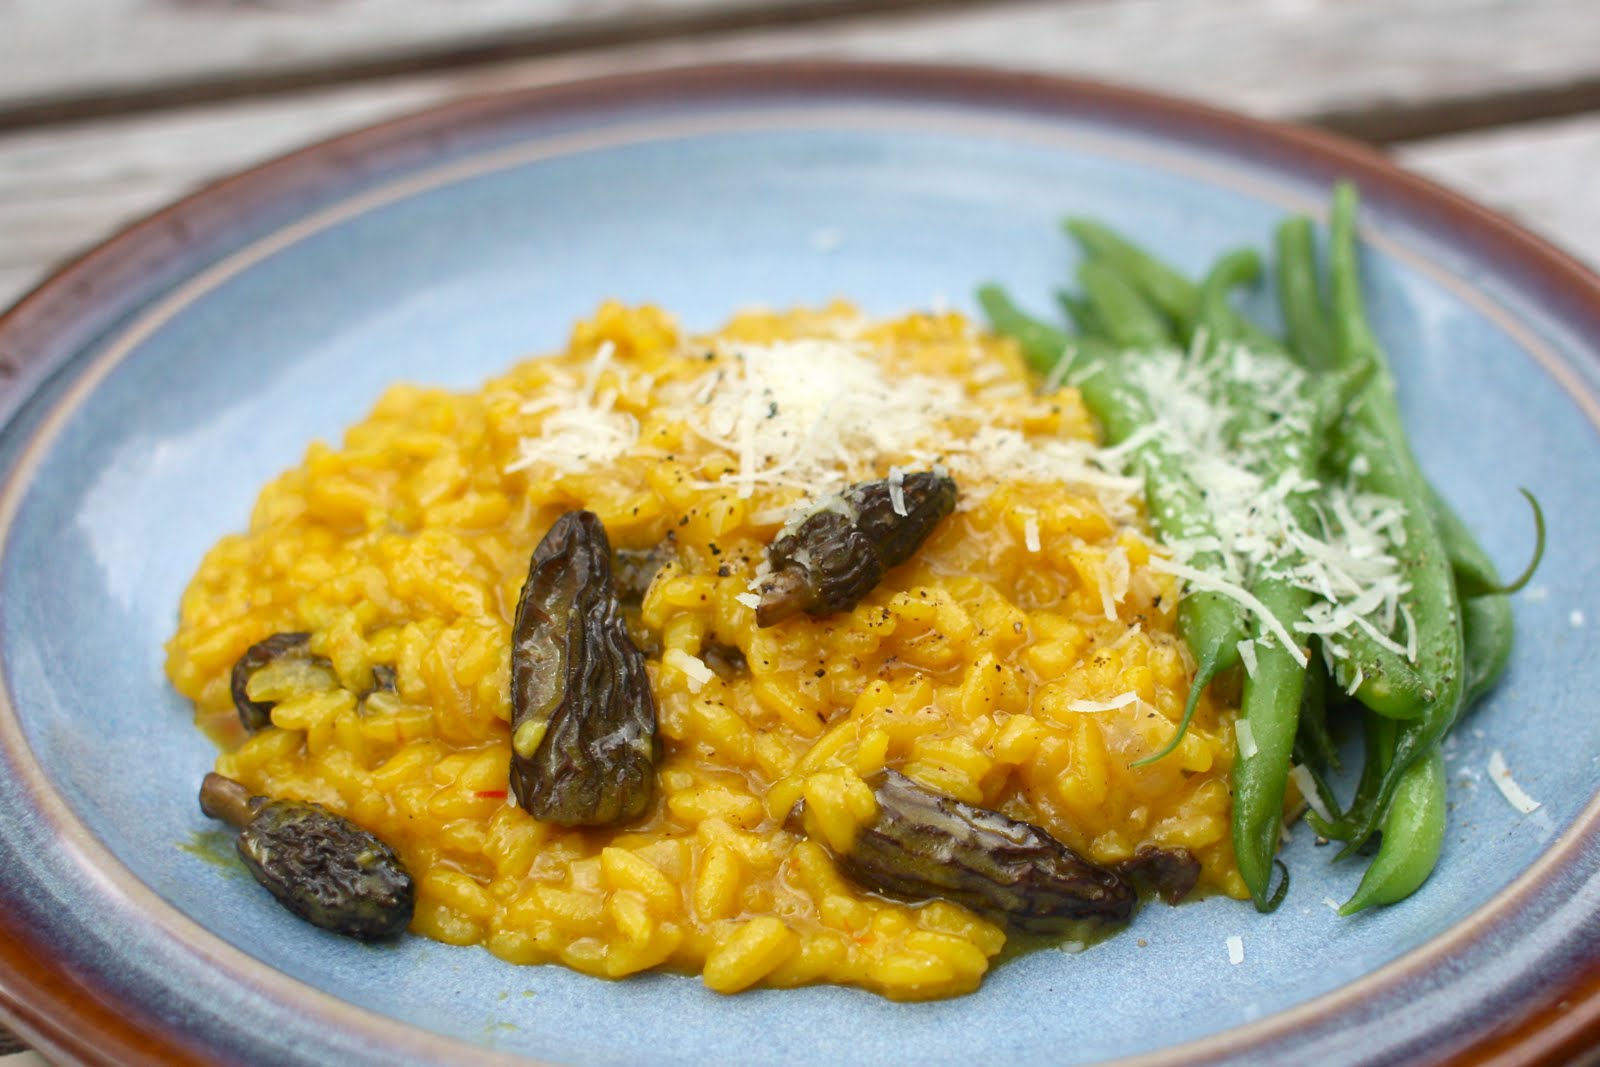 What’s for Dinner? Risotto, step-by-step.